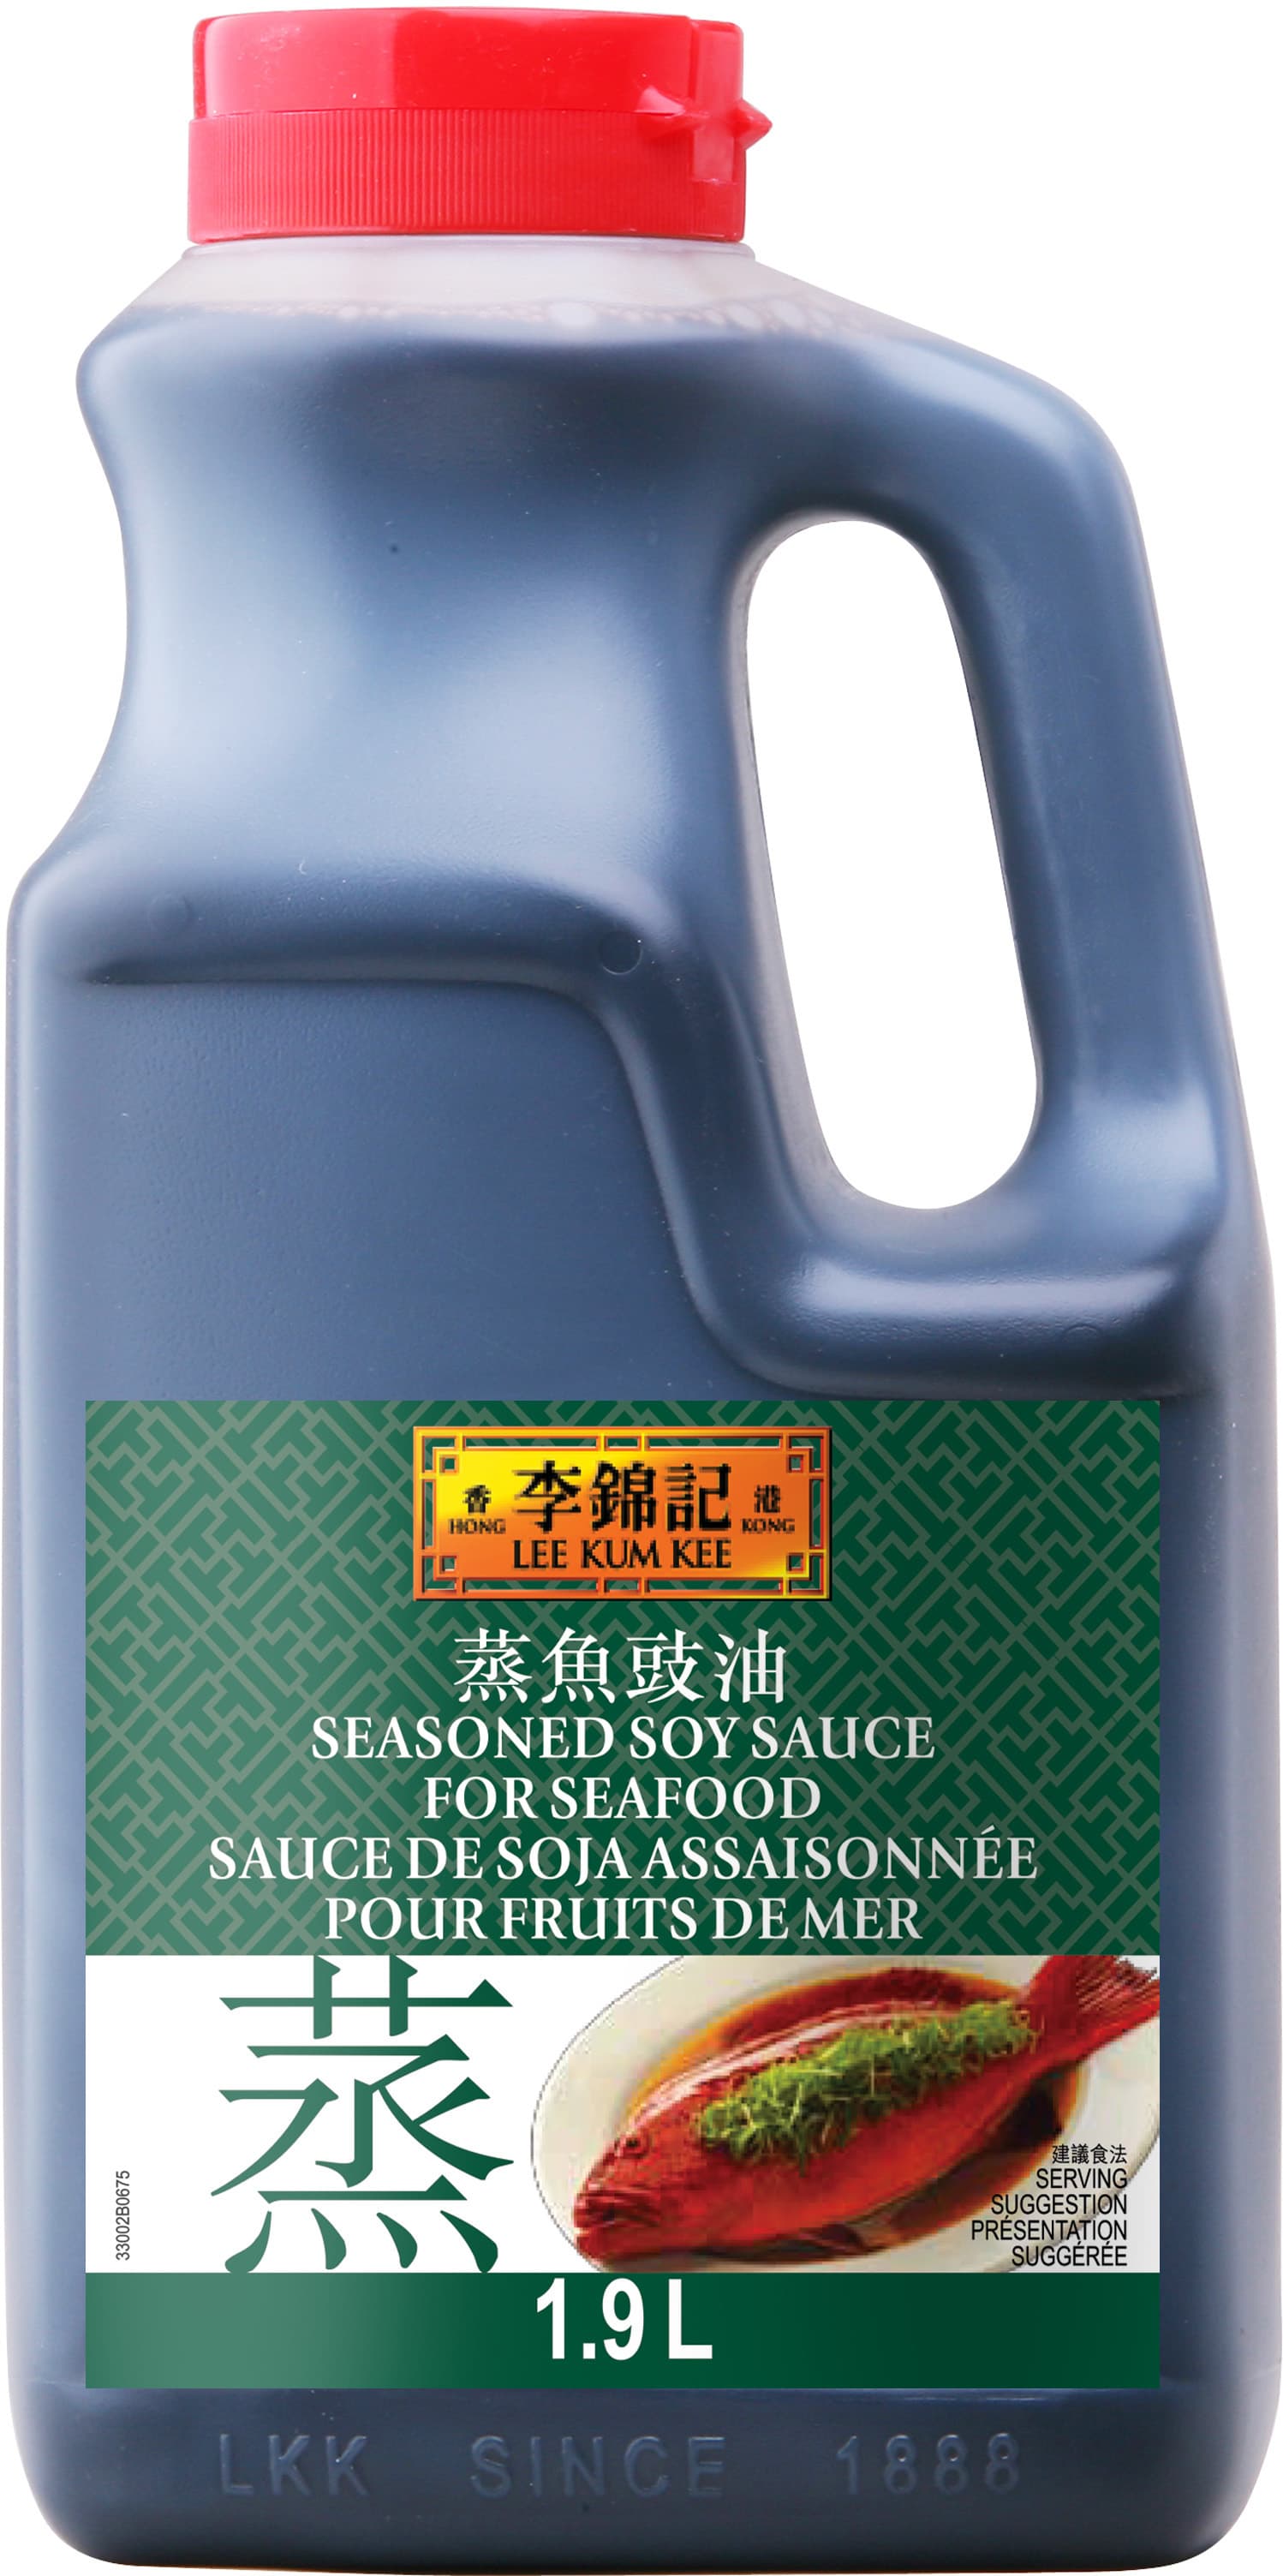 Seasoned Soy Sauce for Seafood 19L cajpg